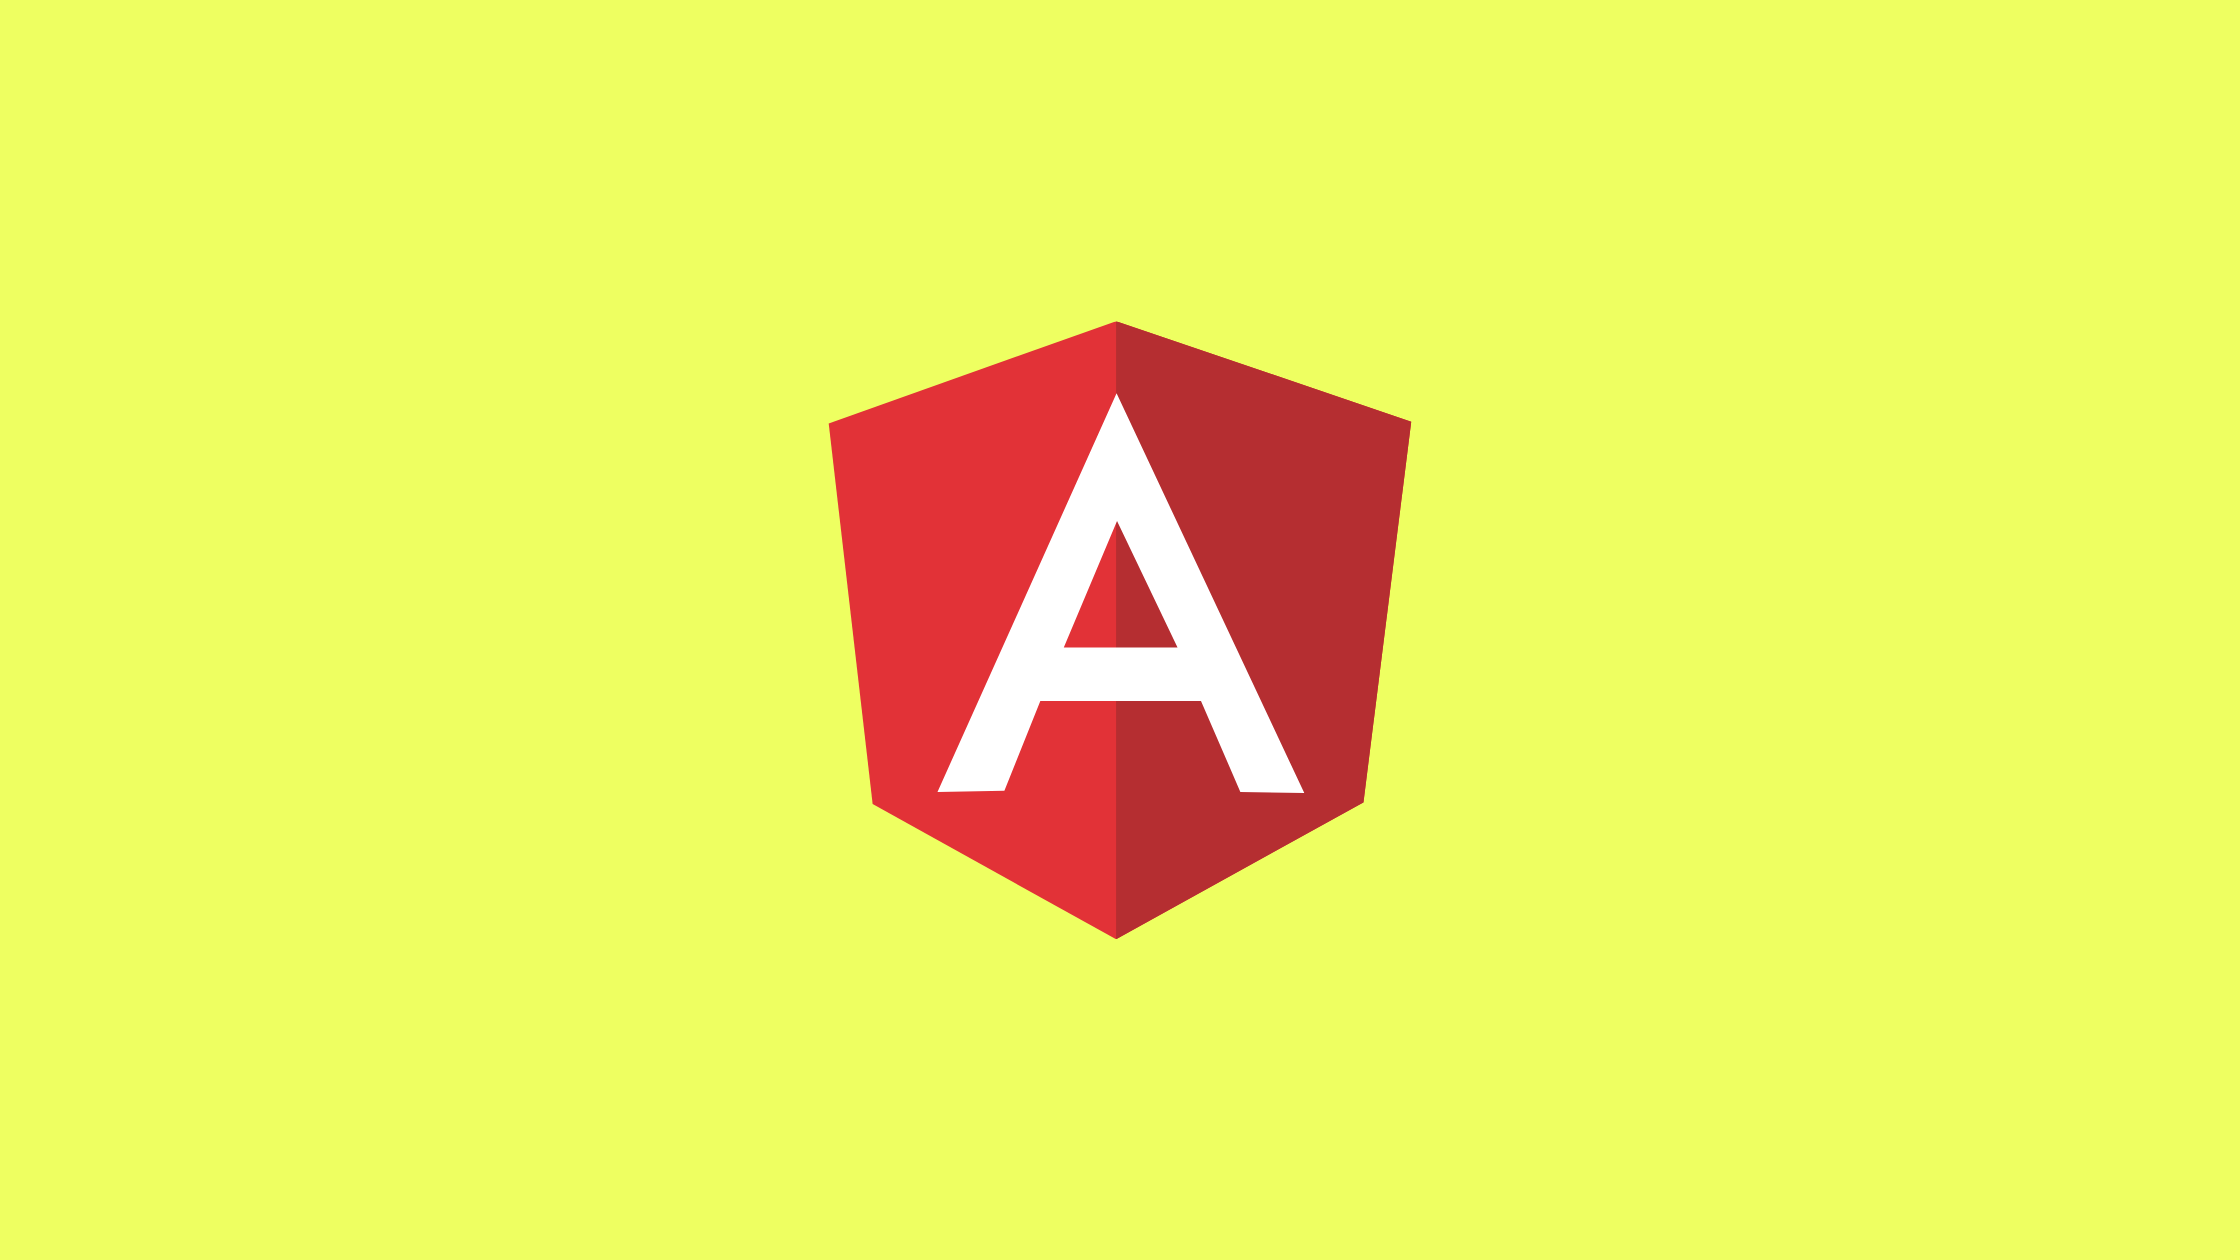 Basic implementation of services in Angular